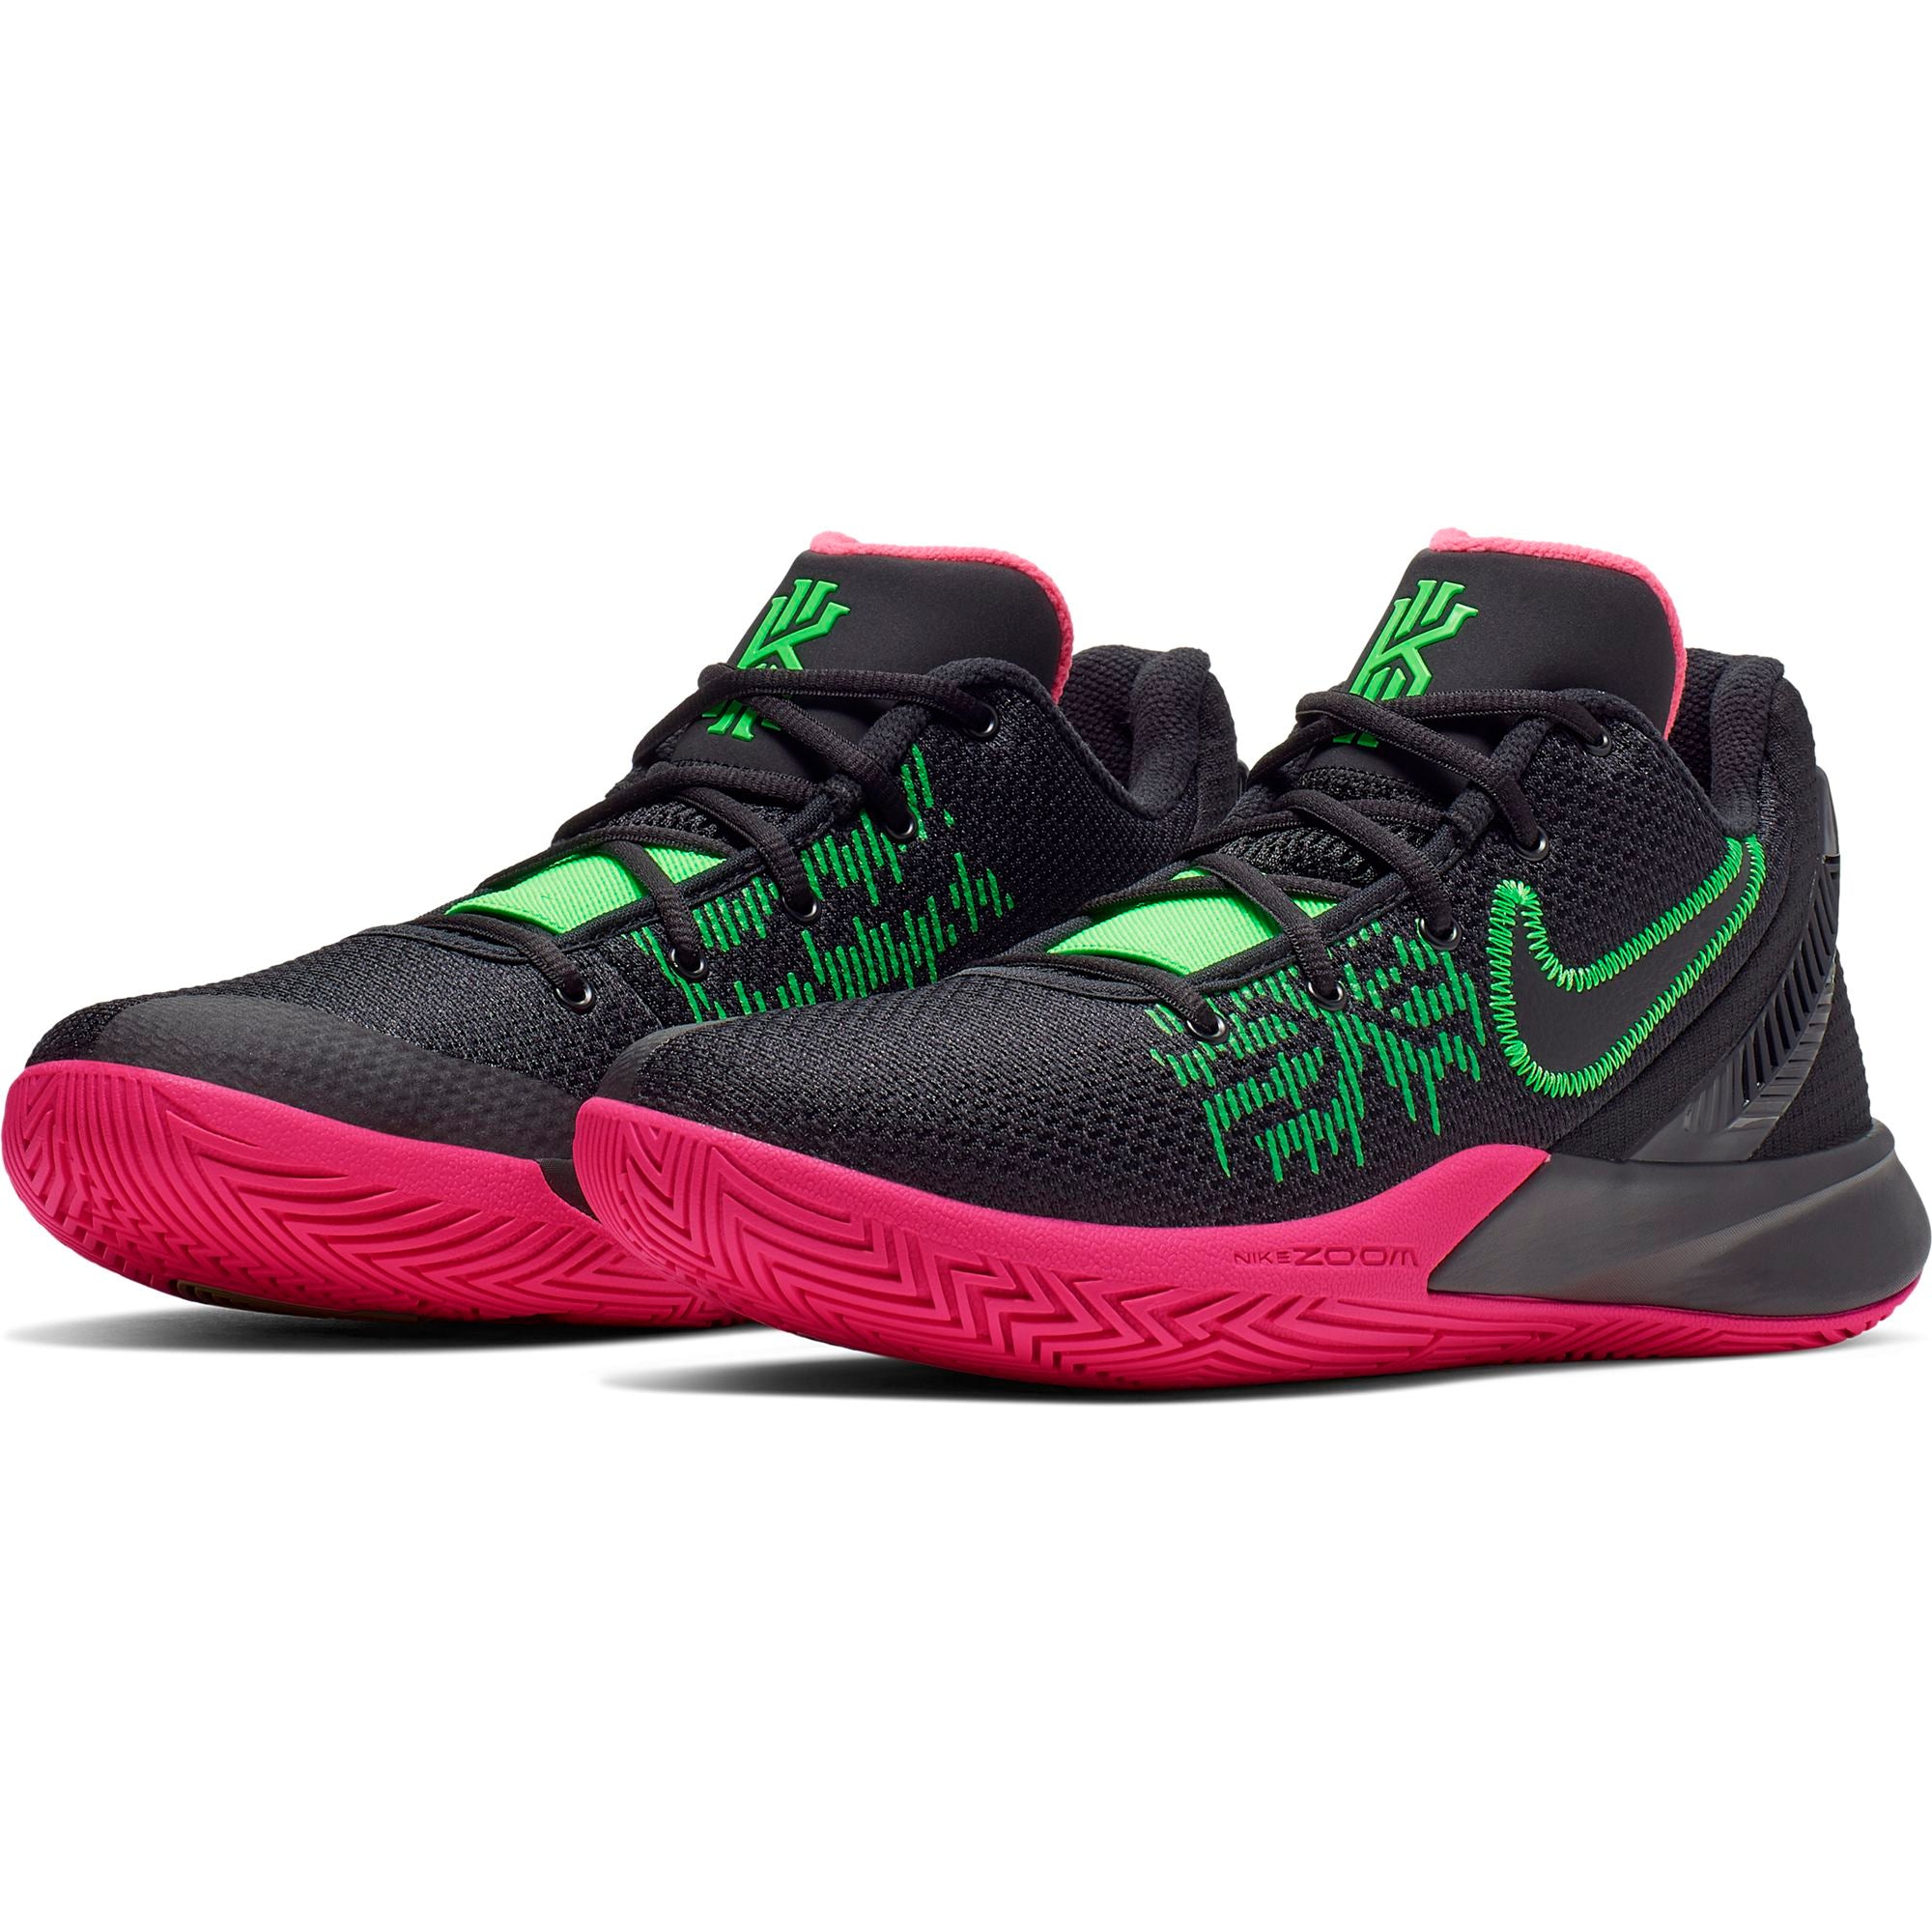 kyrie flytrap 2 pink and grey